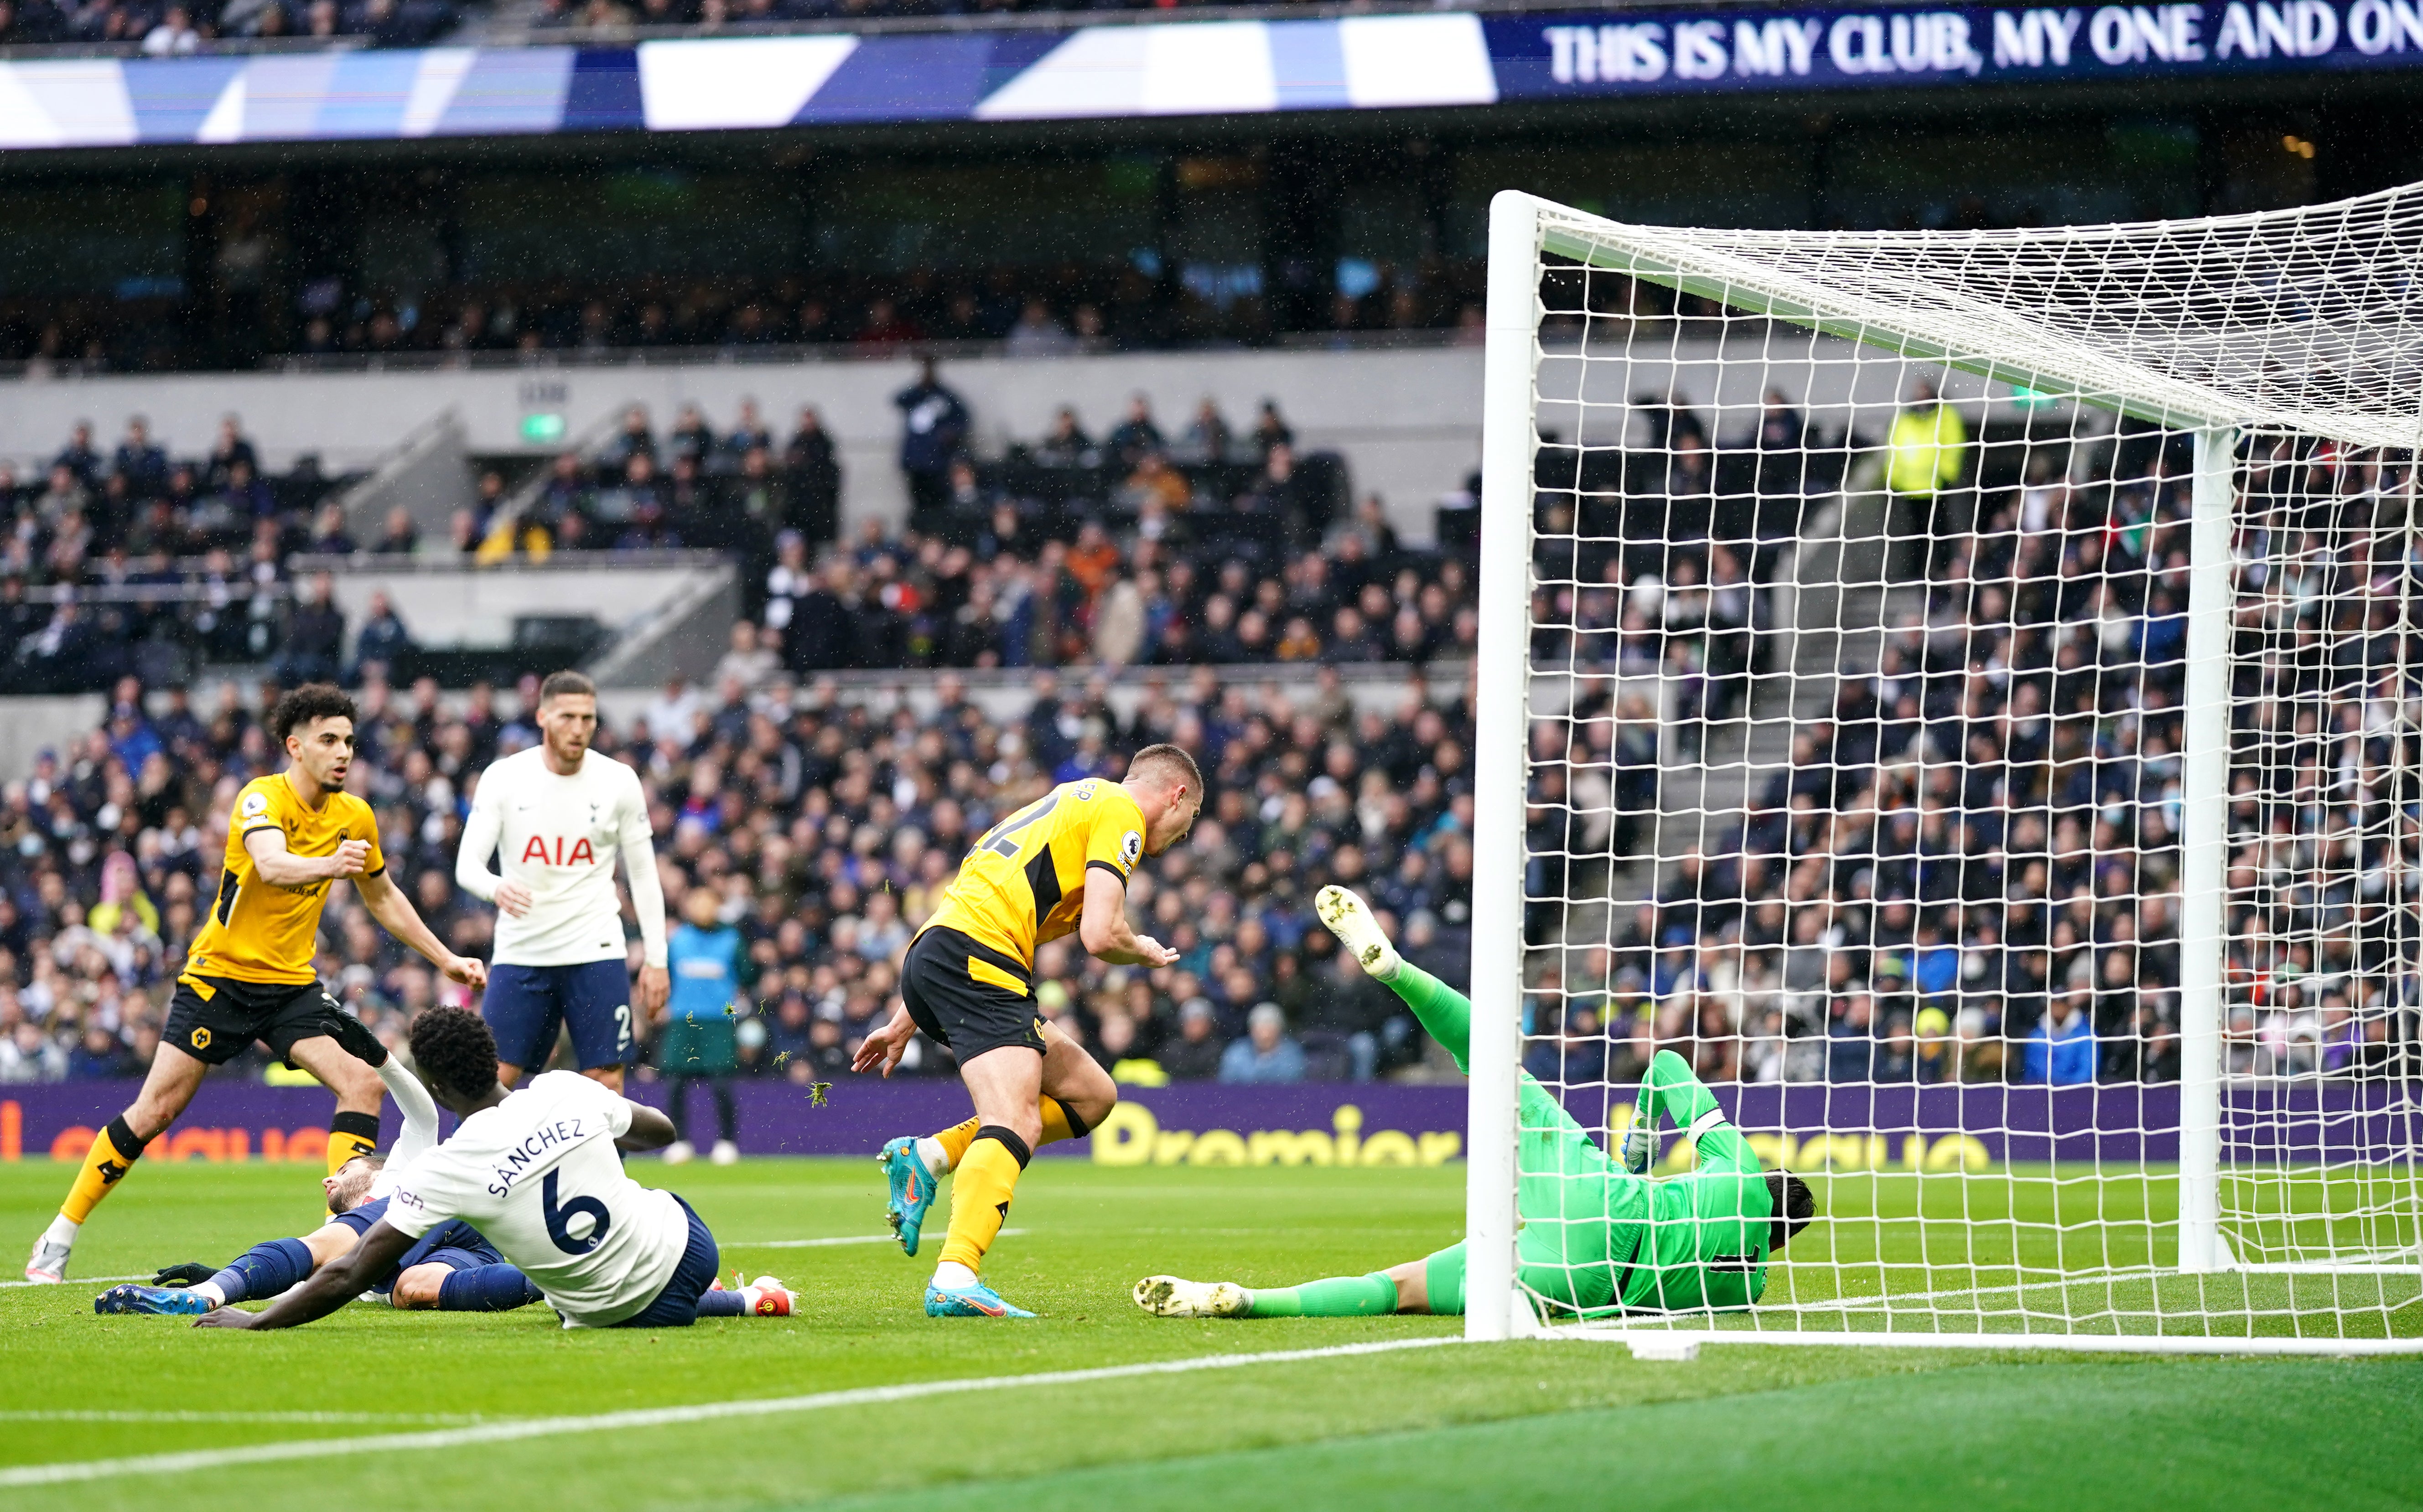 Dendoncker scored Wolves’ second of the afternoon to condemn Spurs to their third defeat on the bounce (John Walton/PA)